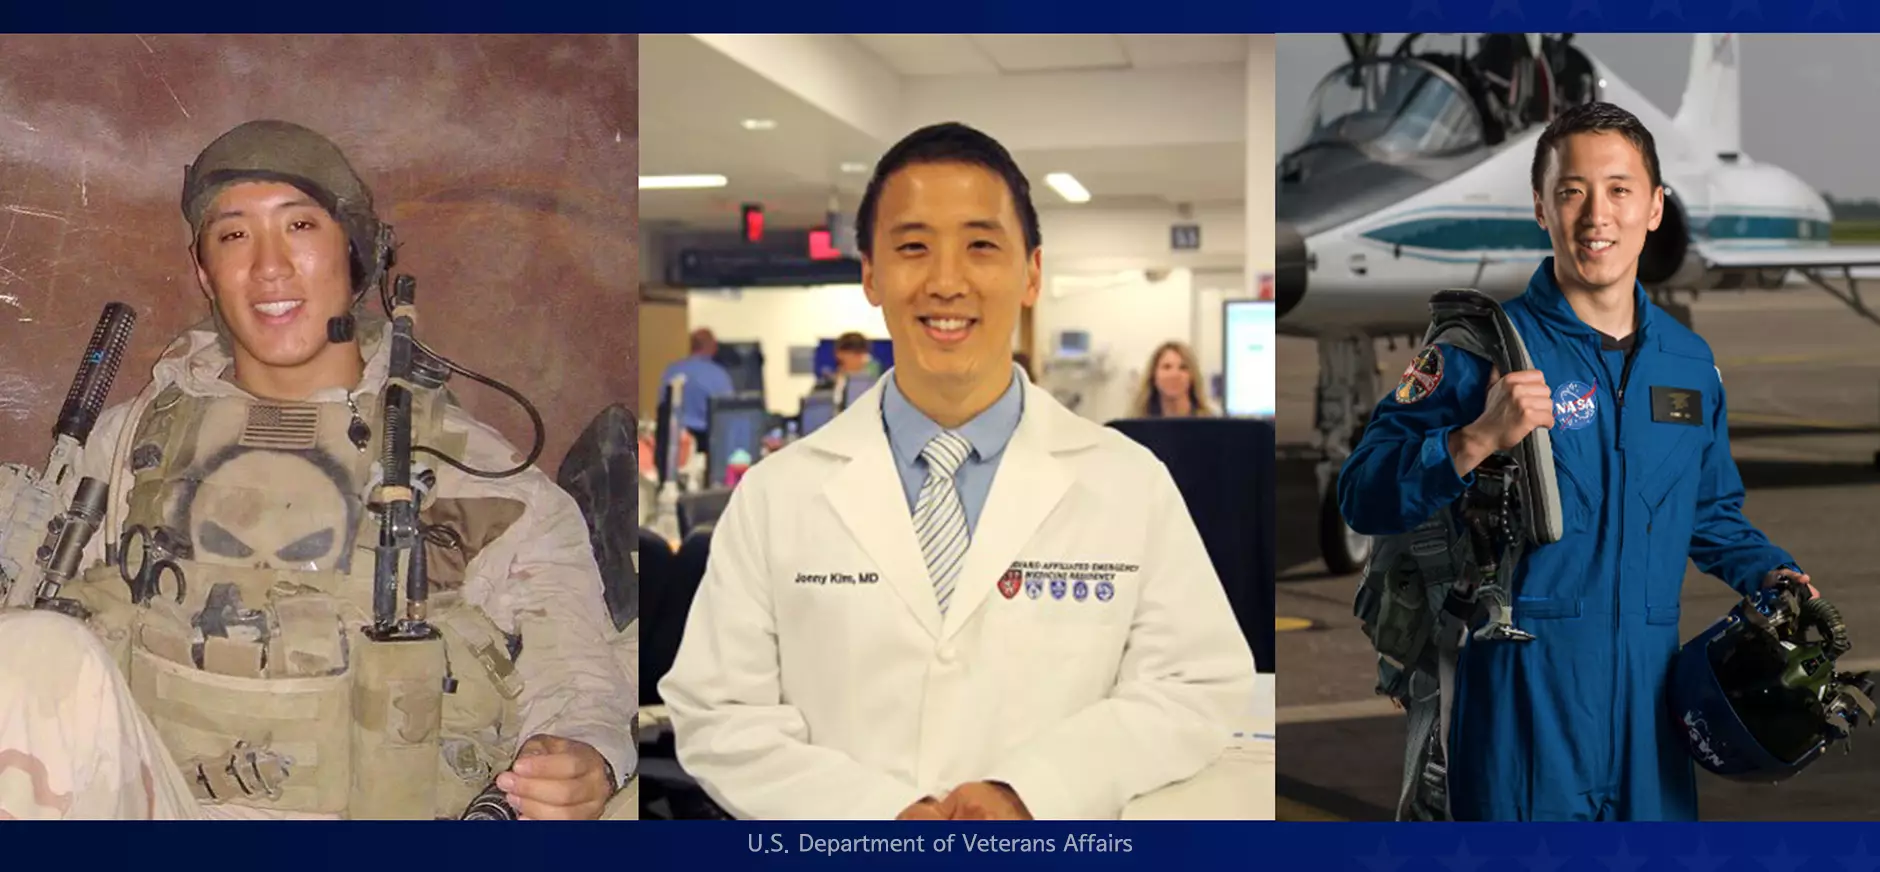 Jonny Kim is a former Navy SEAL and Harvard doctor - and is now a qualified astronaut.